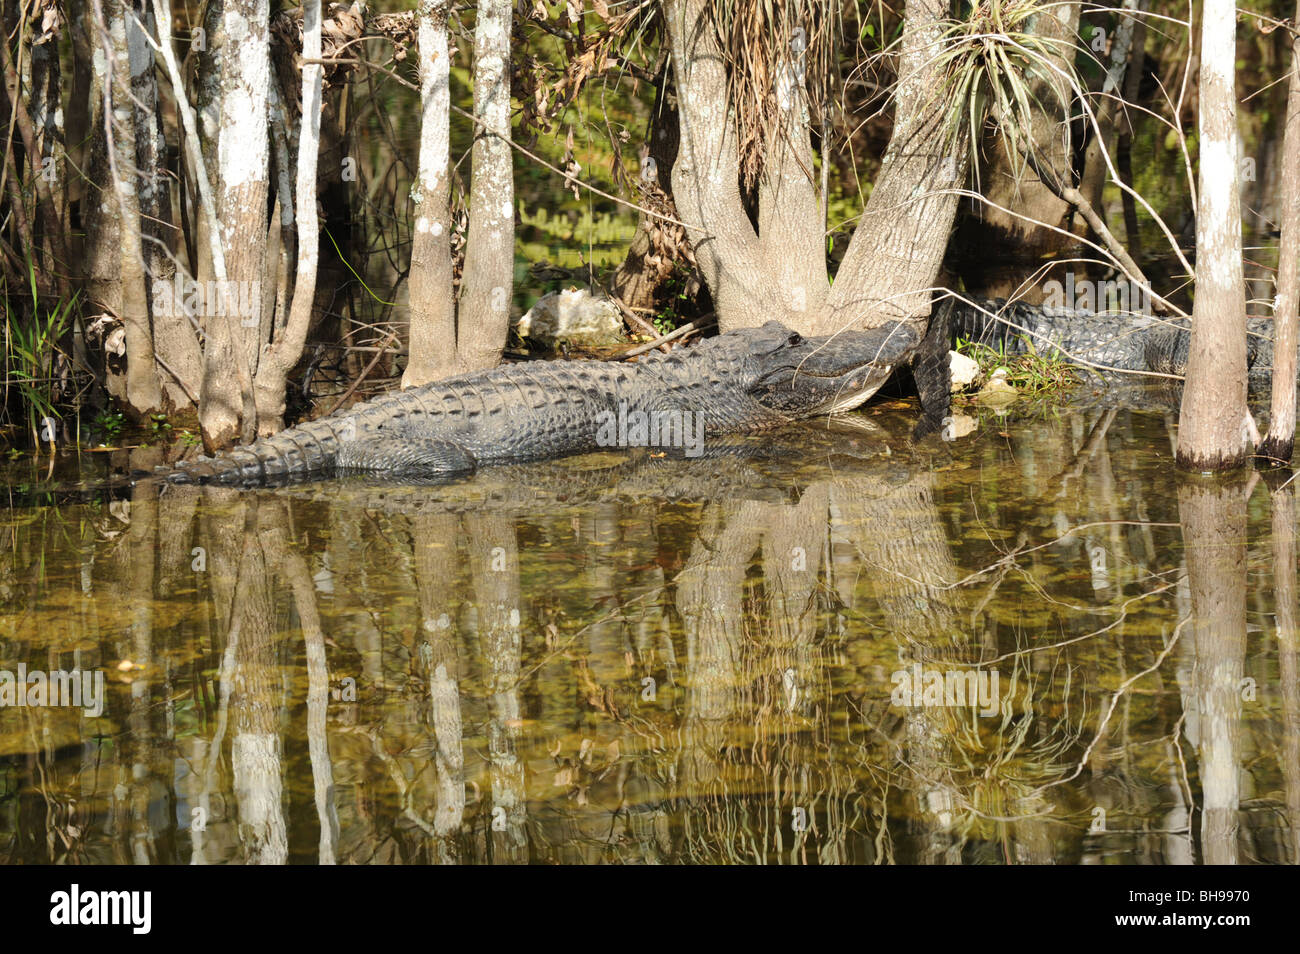 Alligators basking in the sun in the Florida Everglades USA Stock Photo